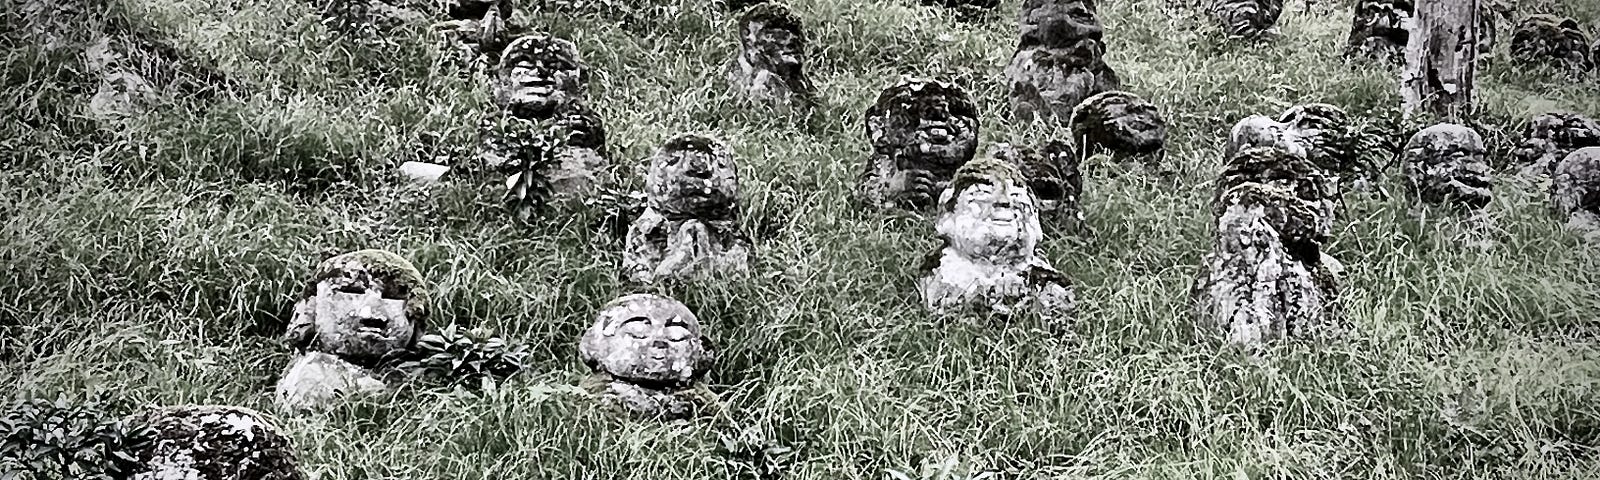 Several stone Buddhist statuettes called Jizo (geez-oh) on a grassy slope in Kyoto, Japan.